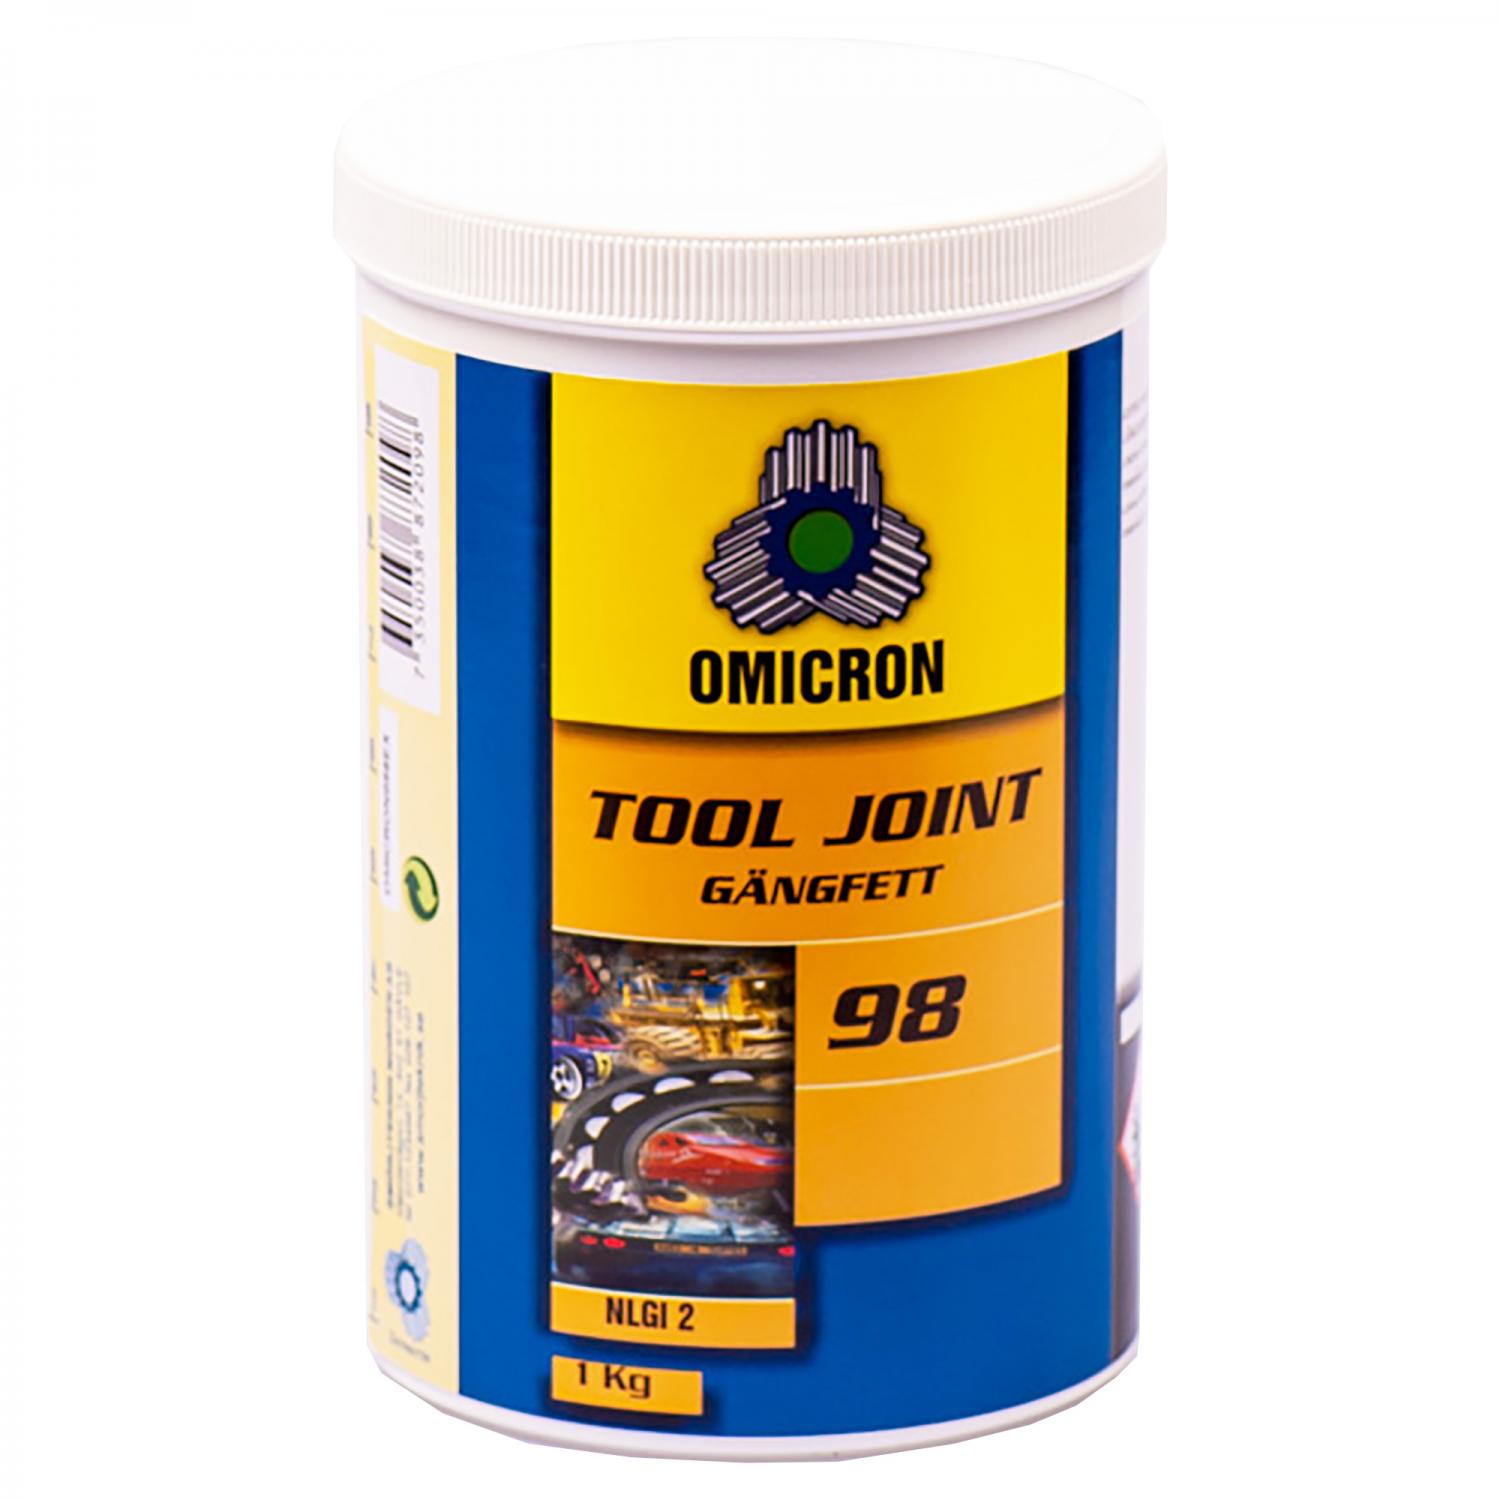 Omicron 98 HIGH PERFORMANCE TOOL JOIN 1kg